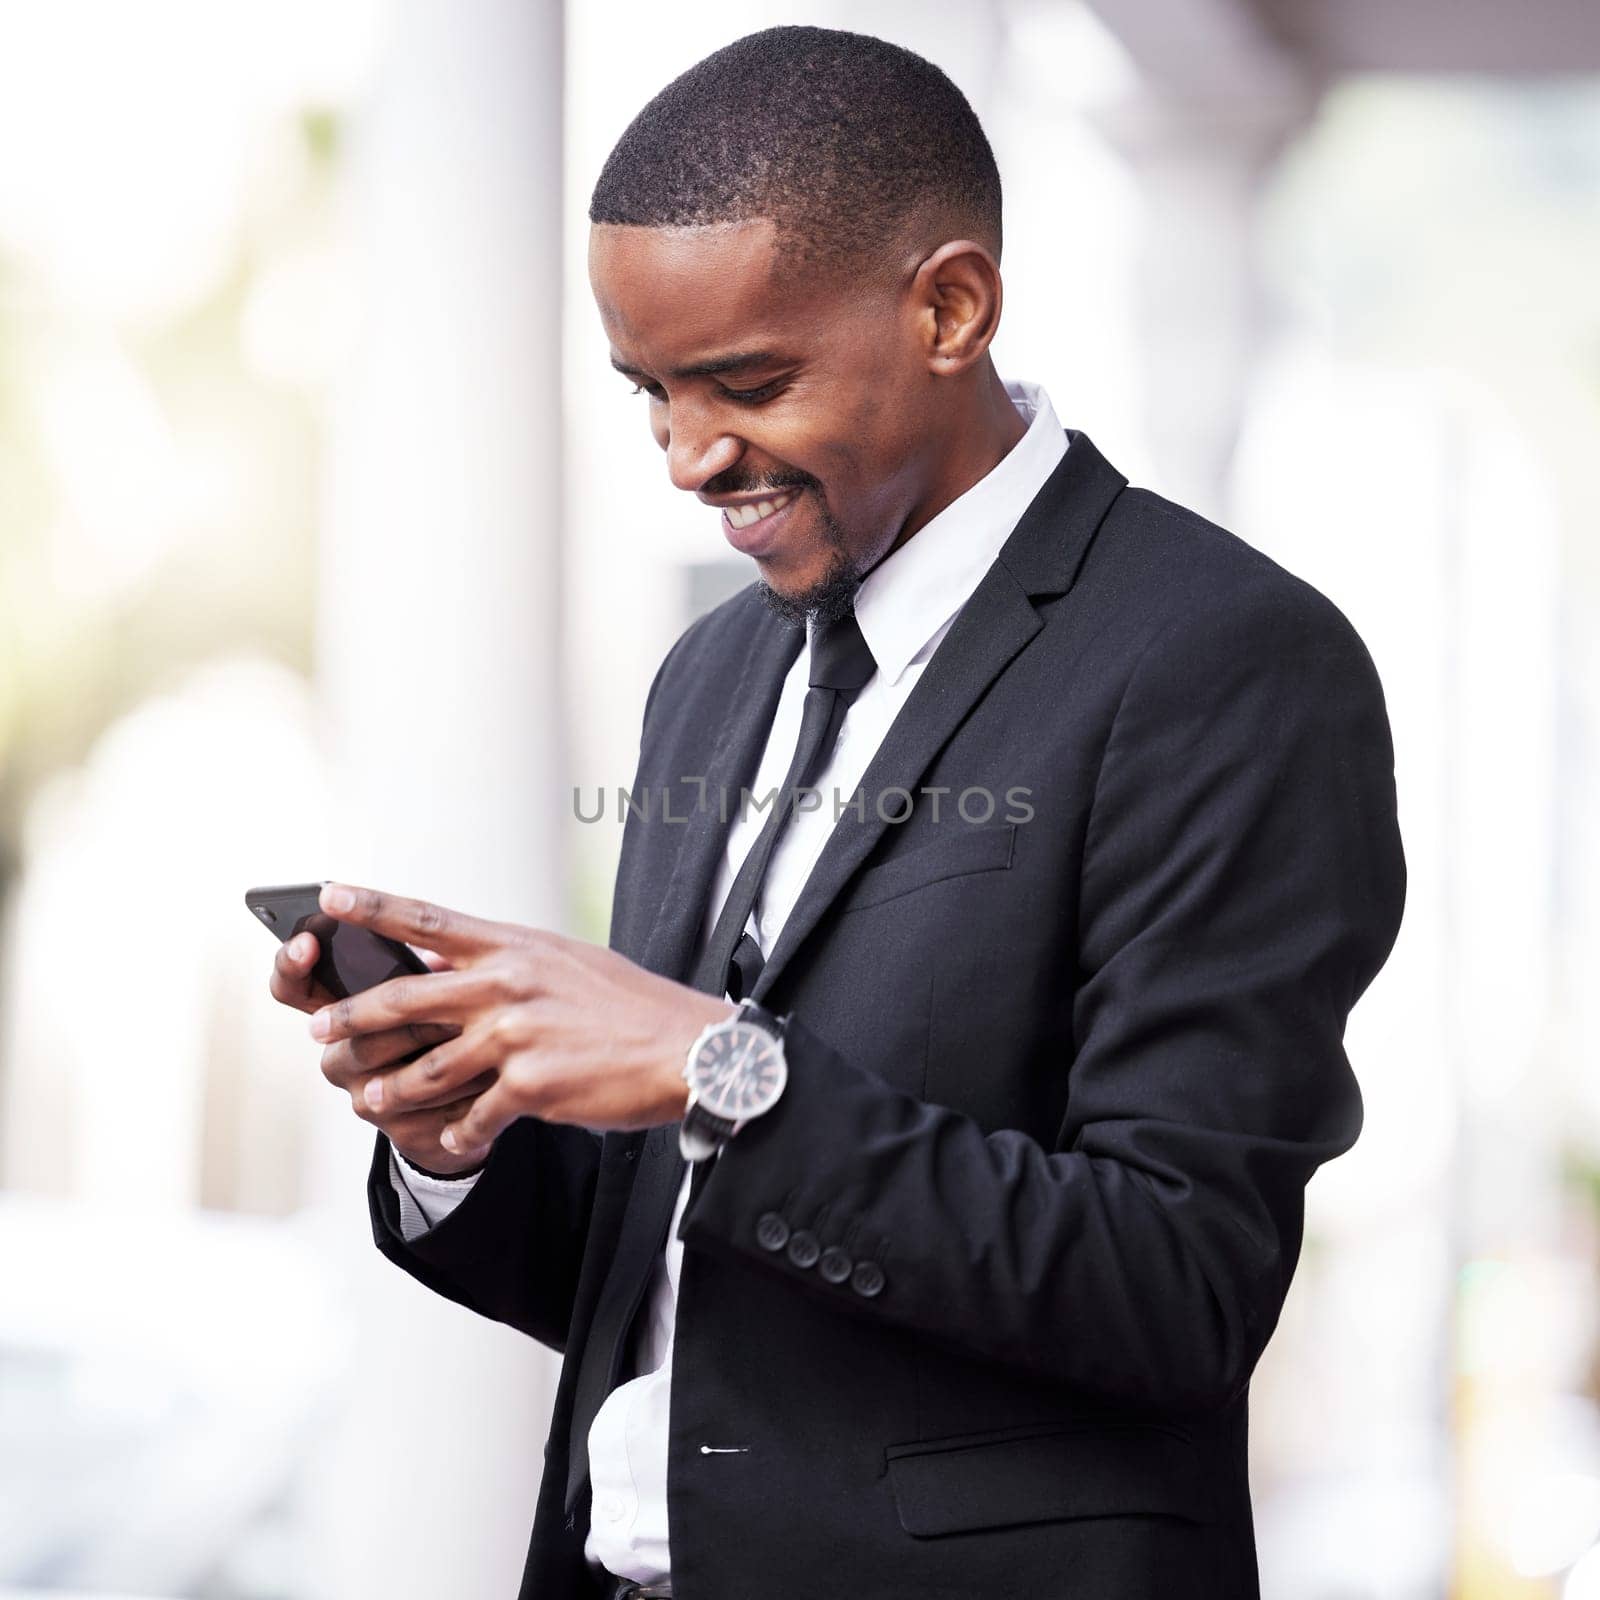 Professional, chat and black man with smartphone in city for networking, communication or social media. Break, smille and lawyer on mobile for browsing web, texting or connection in urban town.